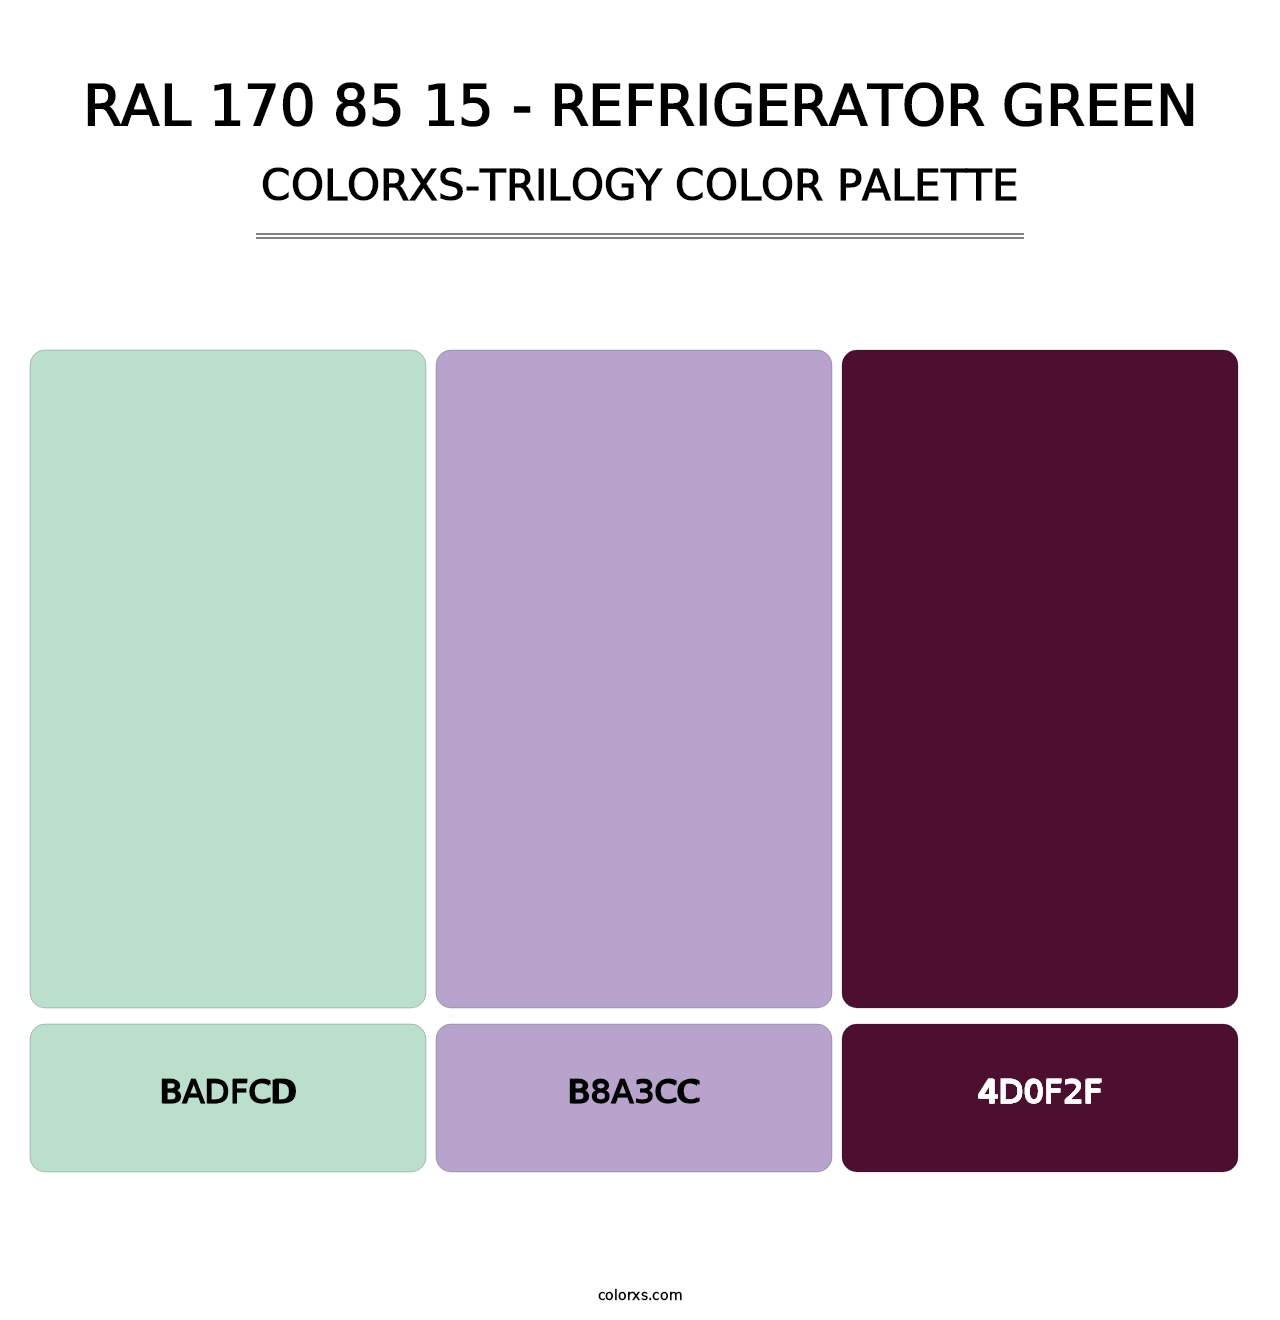 RAL 170 85 15 - Refrigerator Green - Colorxs Trilogy Palette